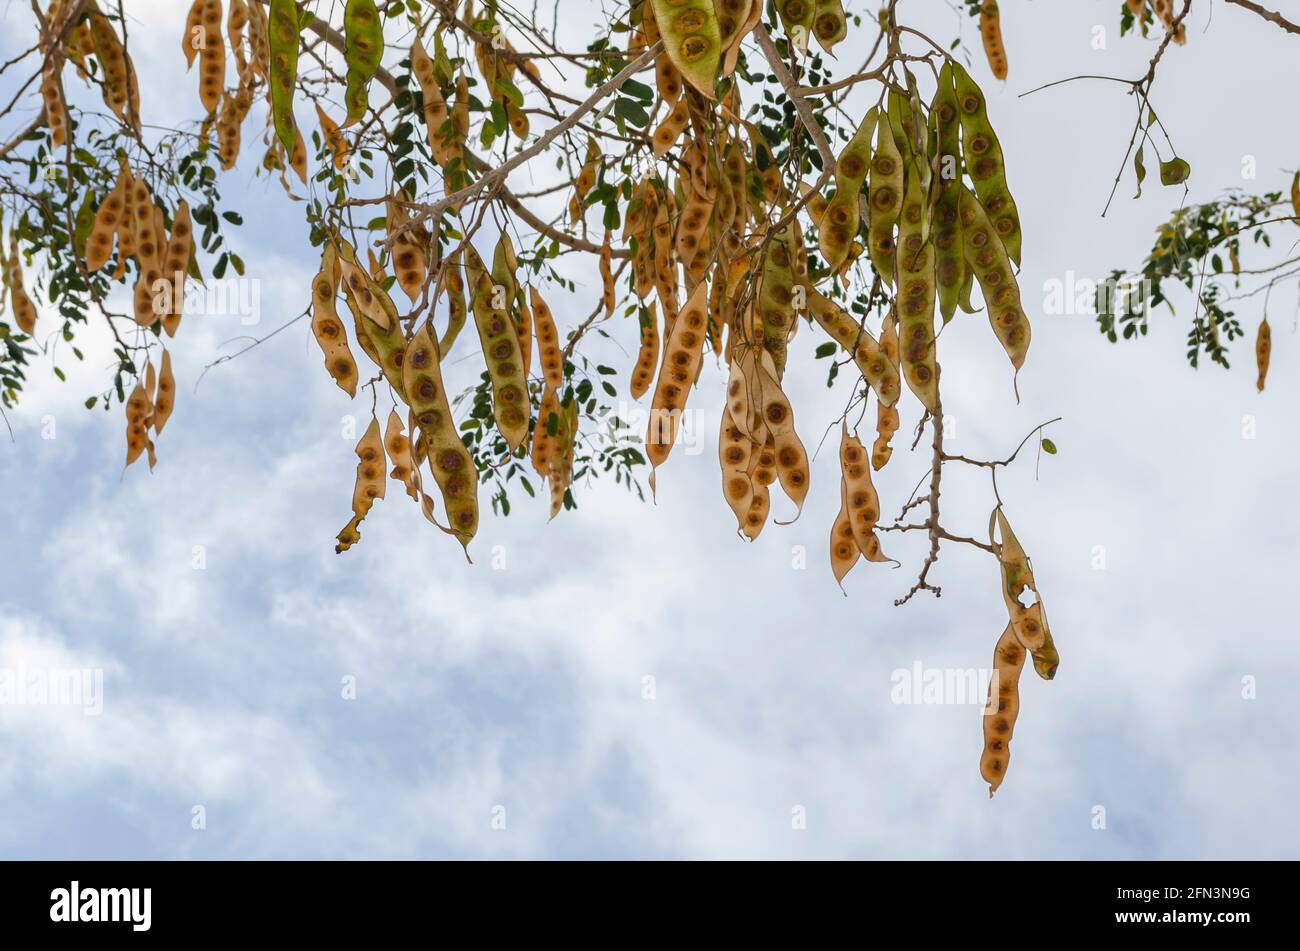 Branch With Albizia Lebbeck Pods Against Sky Background Stock Photo